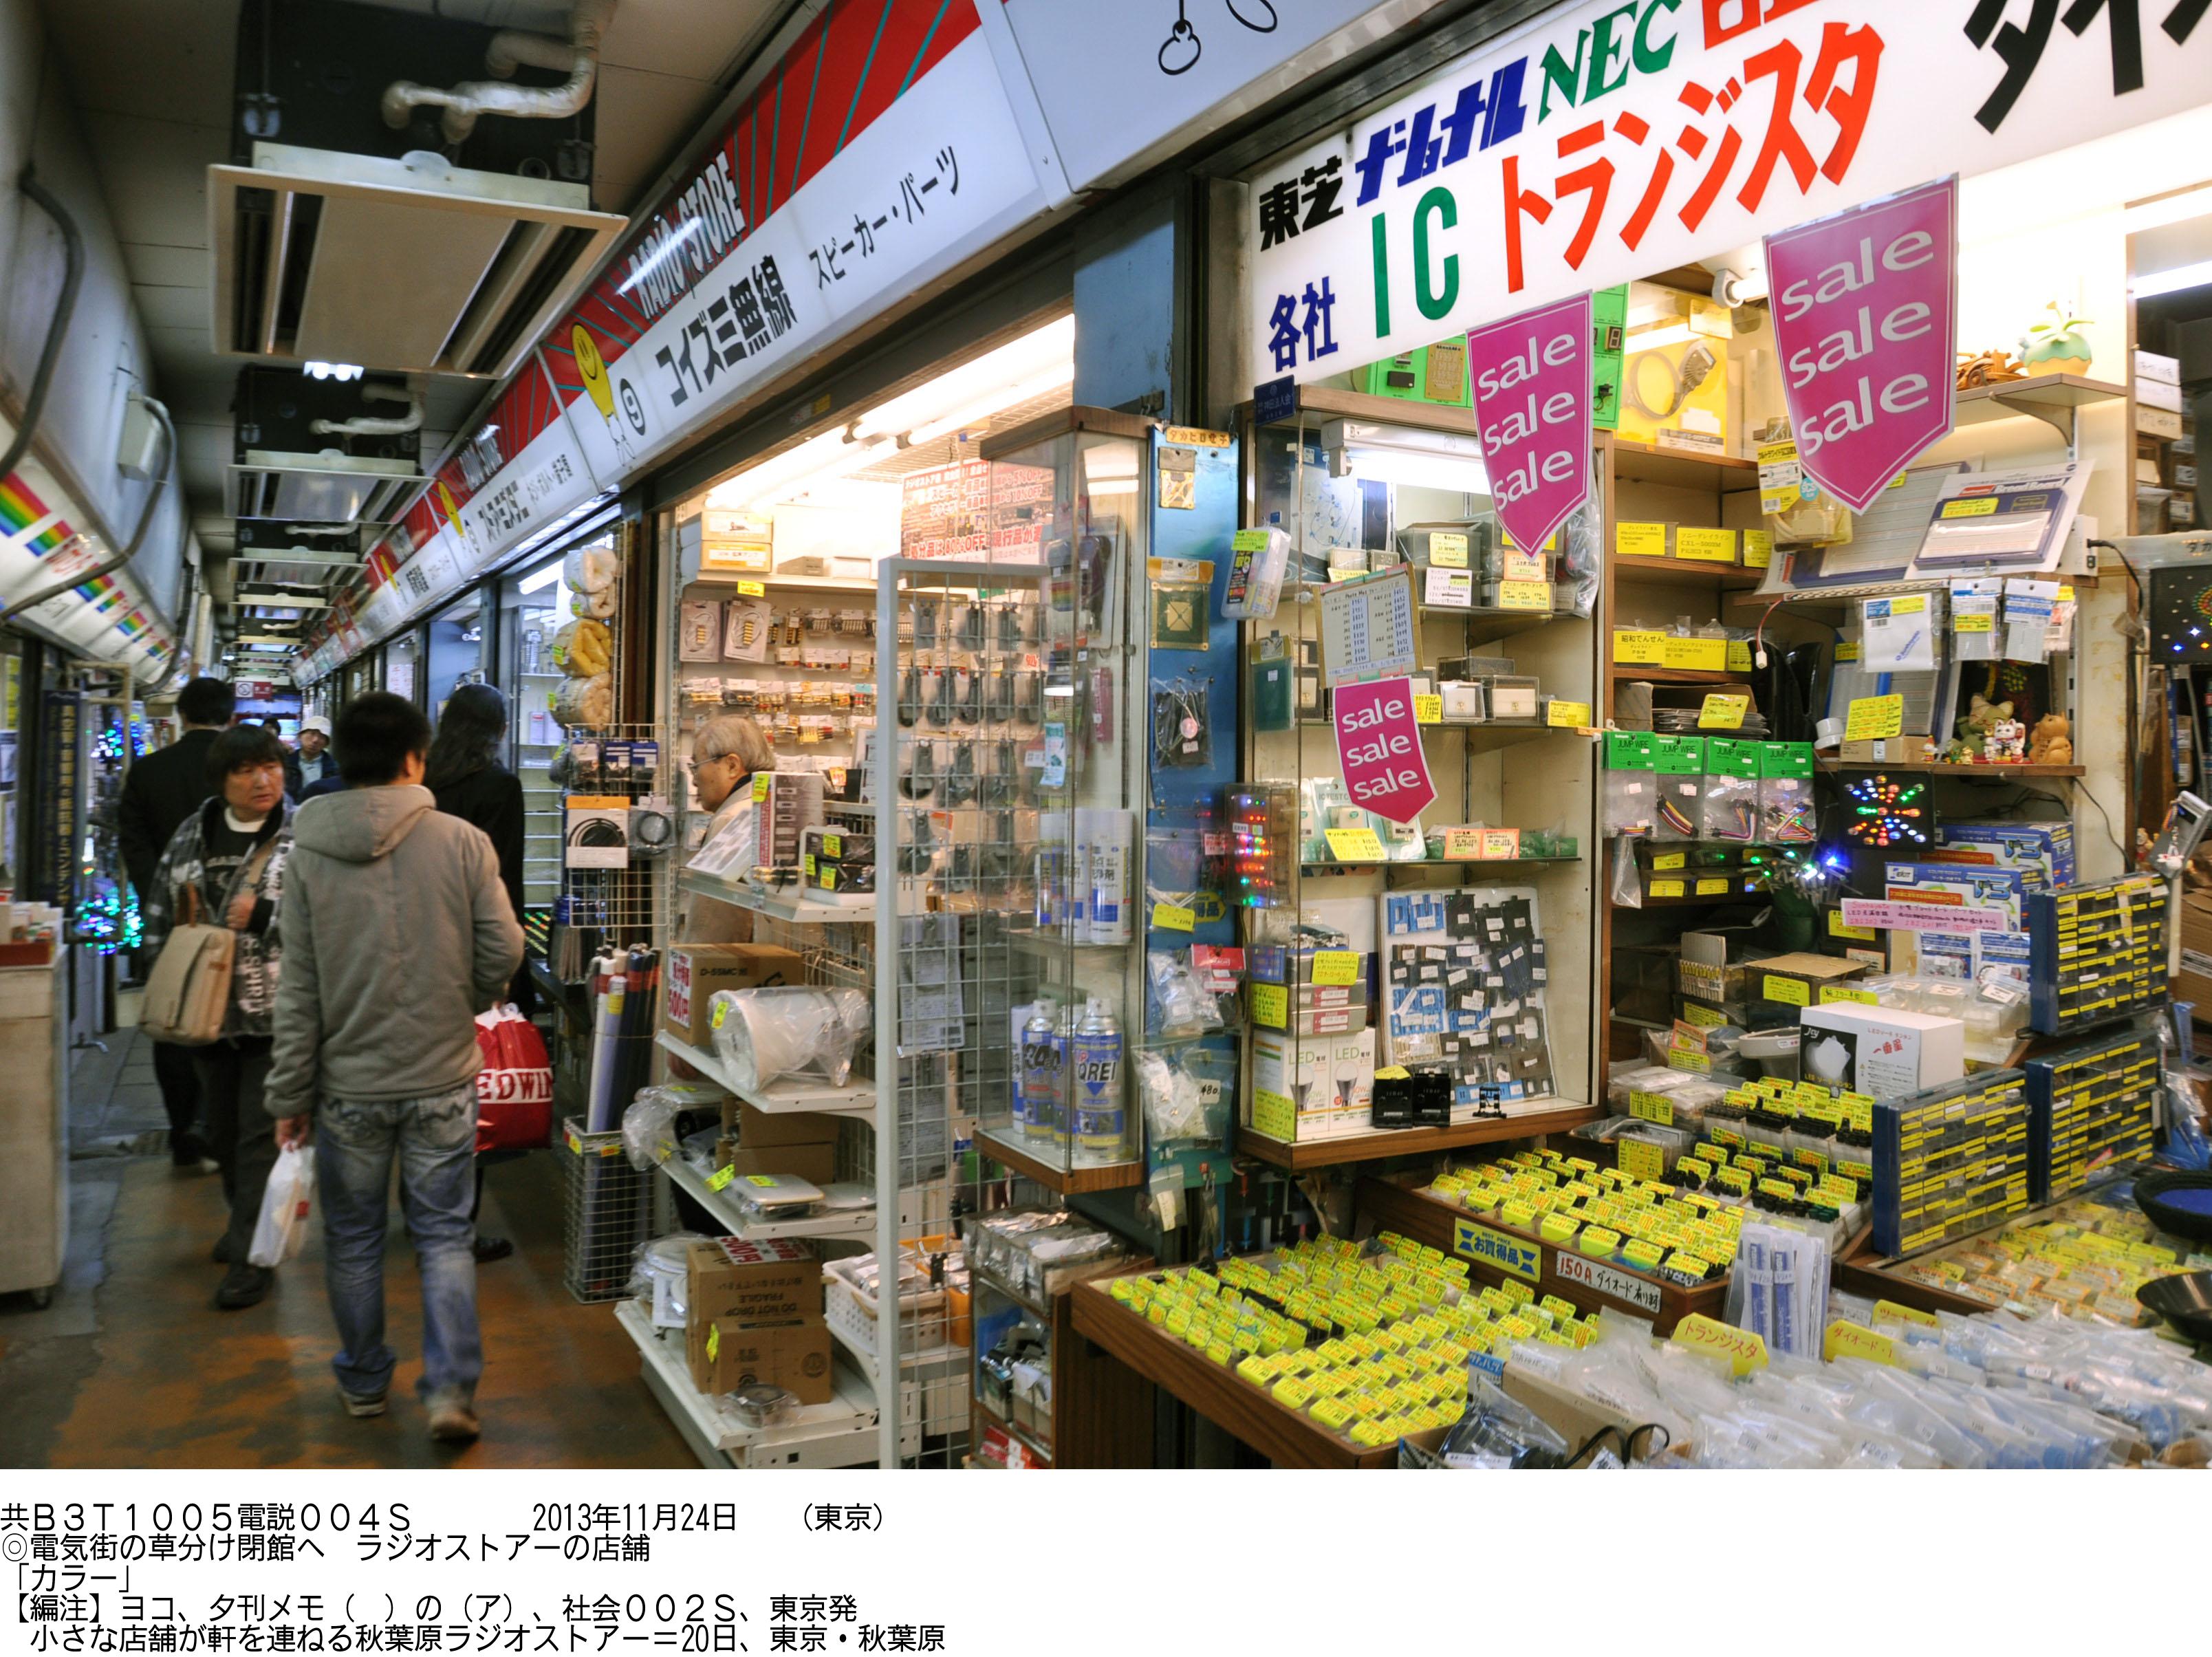 End of an era: Small shops crammed with electronics parts have operated for decades in the Akihabara Radio Store in Tokyo. | KYODO